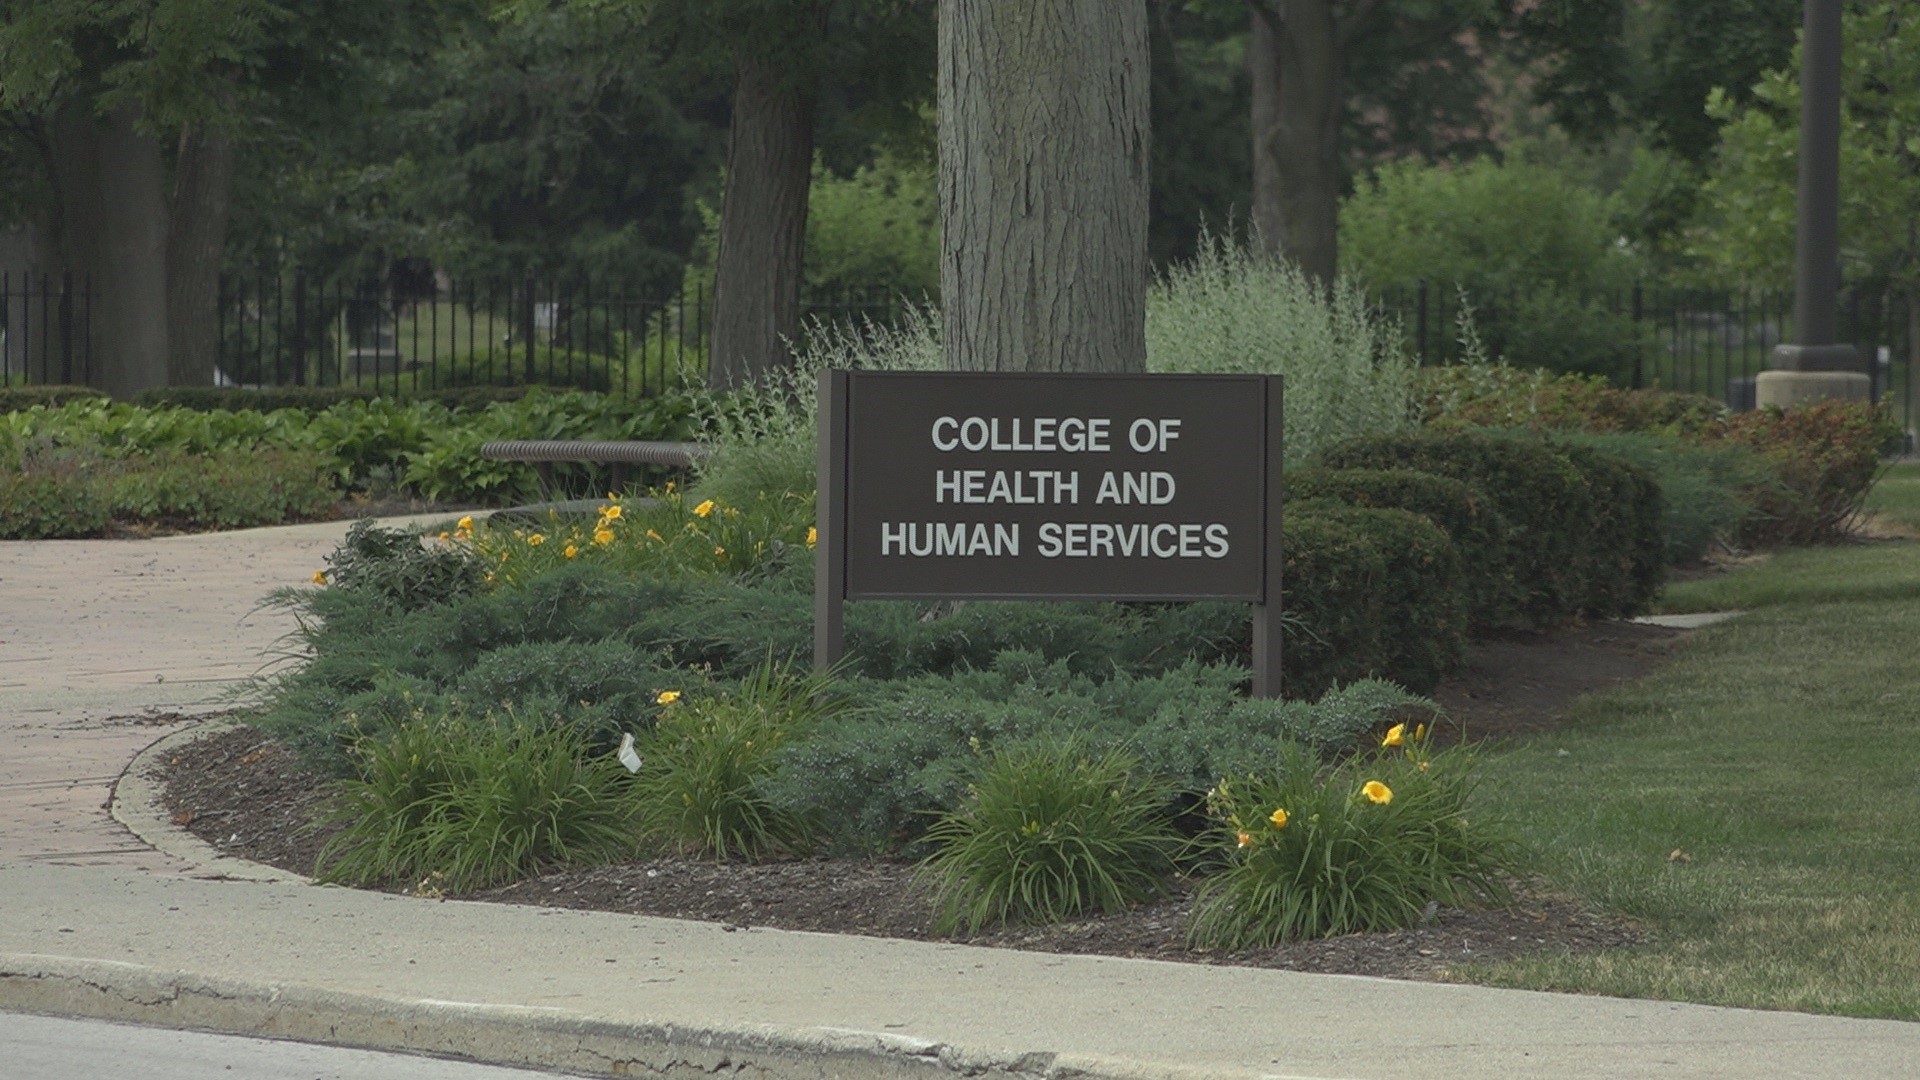 Expansion is coming to BGSU as the college launches new programs. They will have a School of Nursing, beginning July 1 and a school of Physical Therapy.